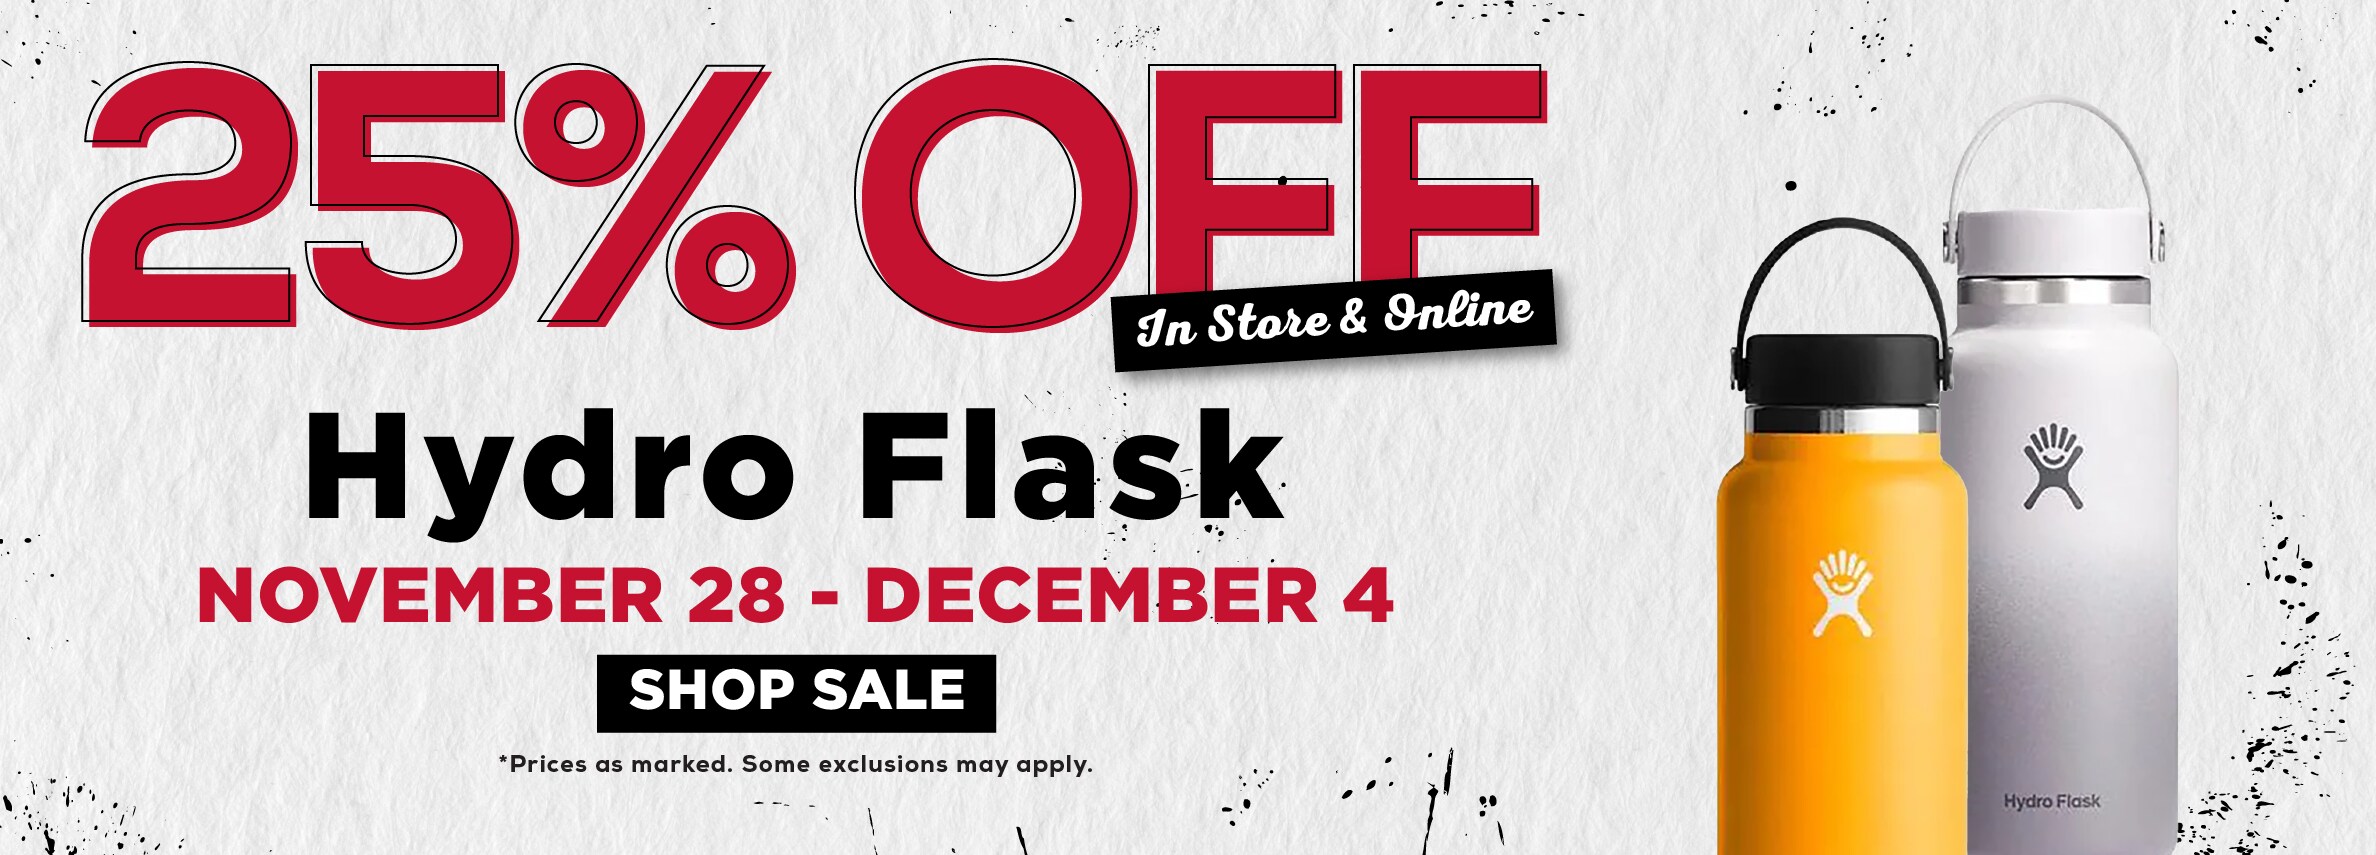 25% OFF In Stare & Online Hydro Flask NOVEMBER 28 - DECEMBER 4 SHOP SALE *Prices as marked. Some exclusions may apply.